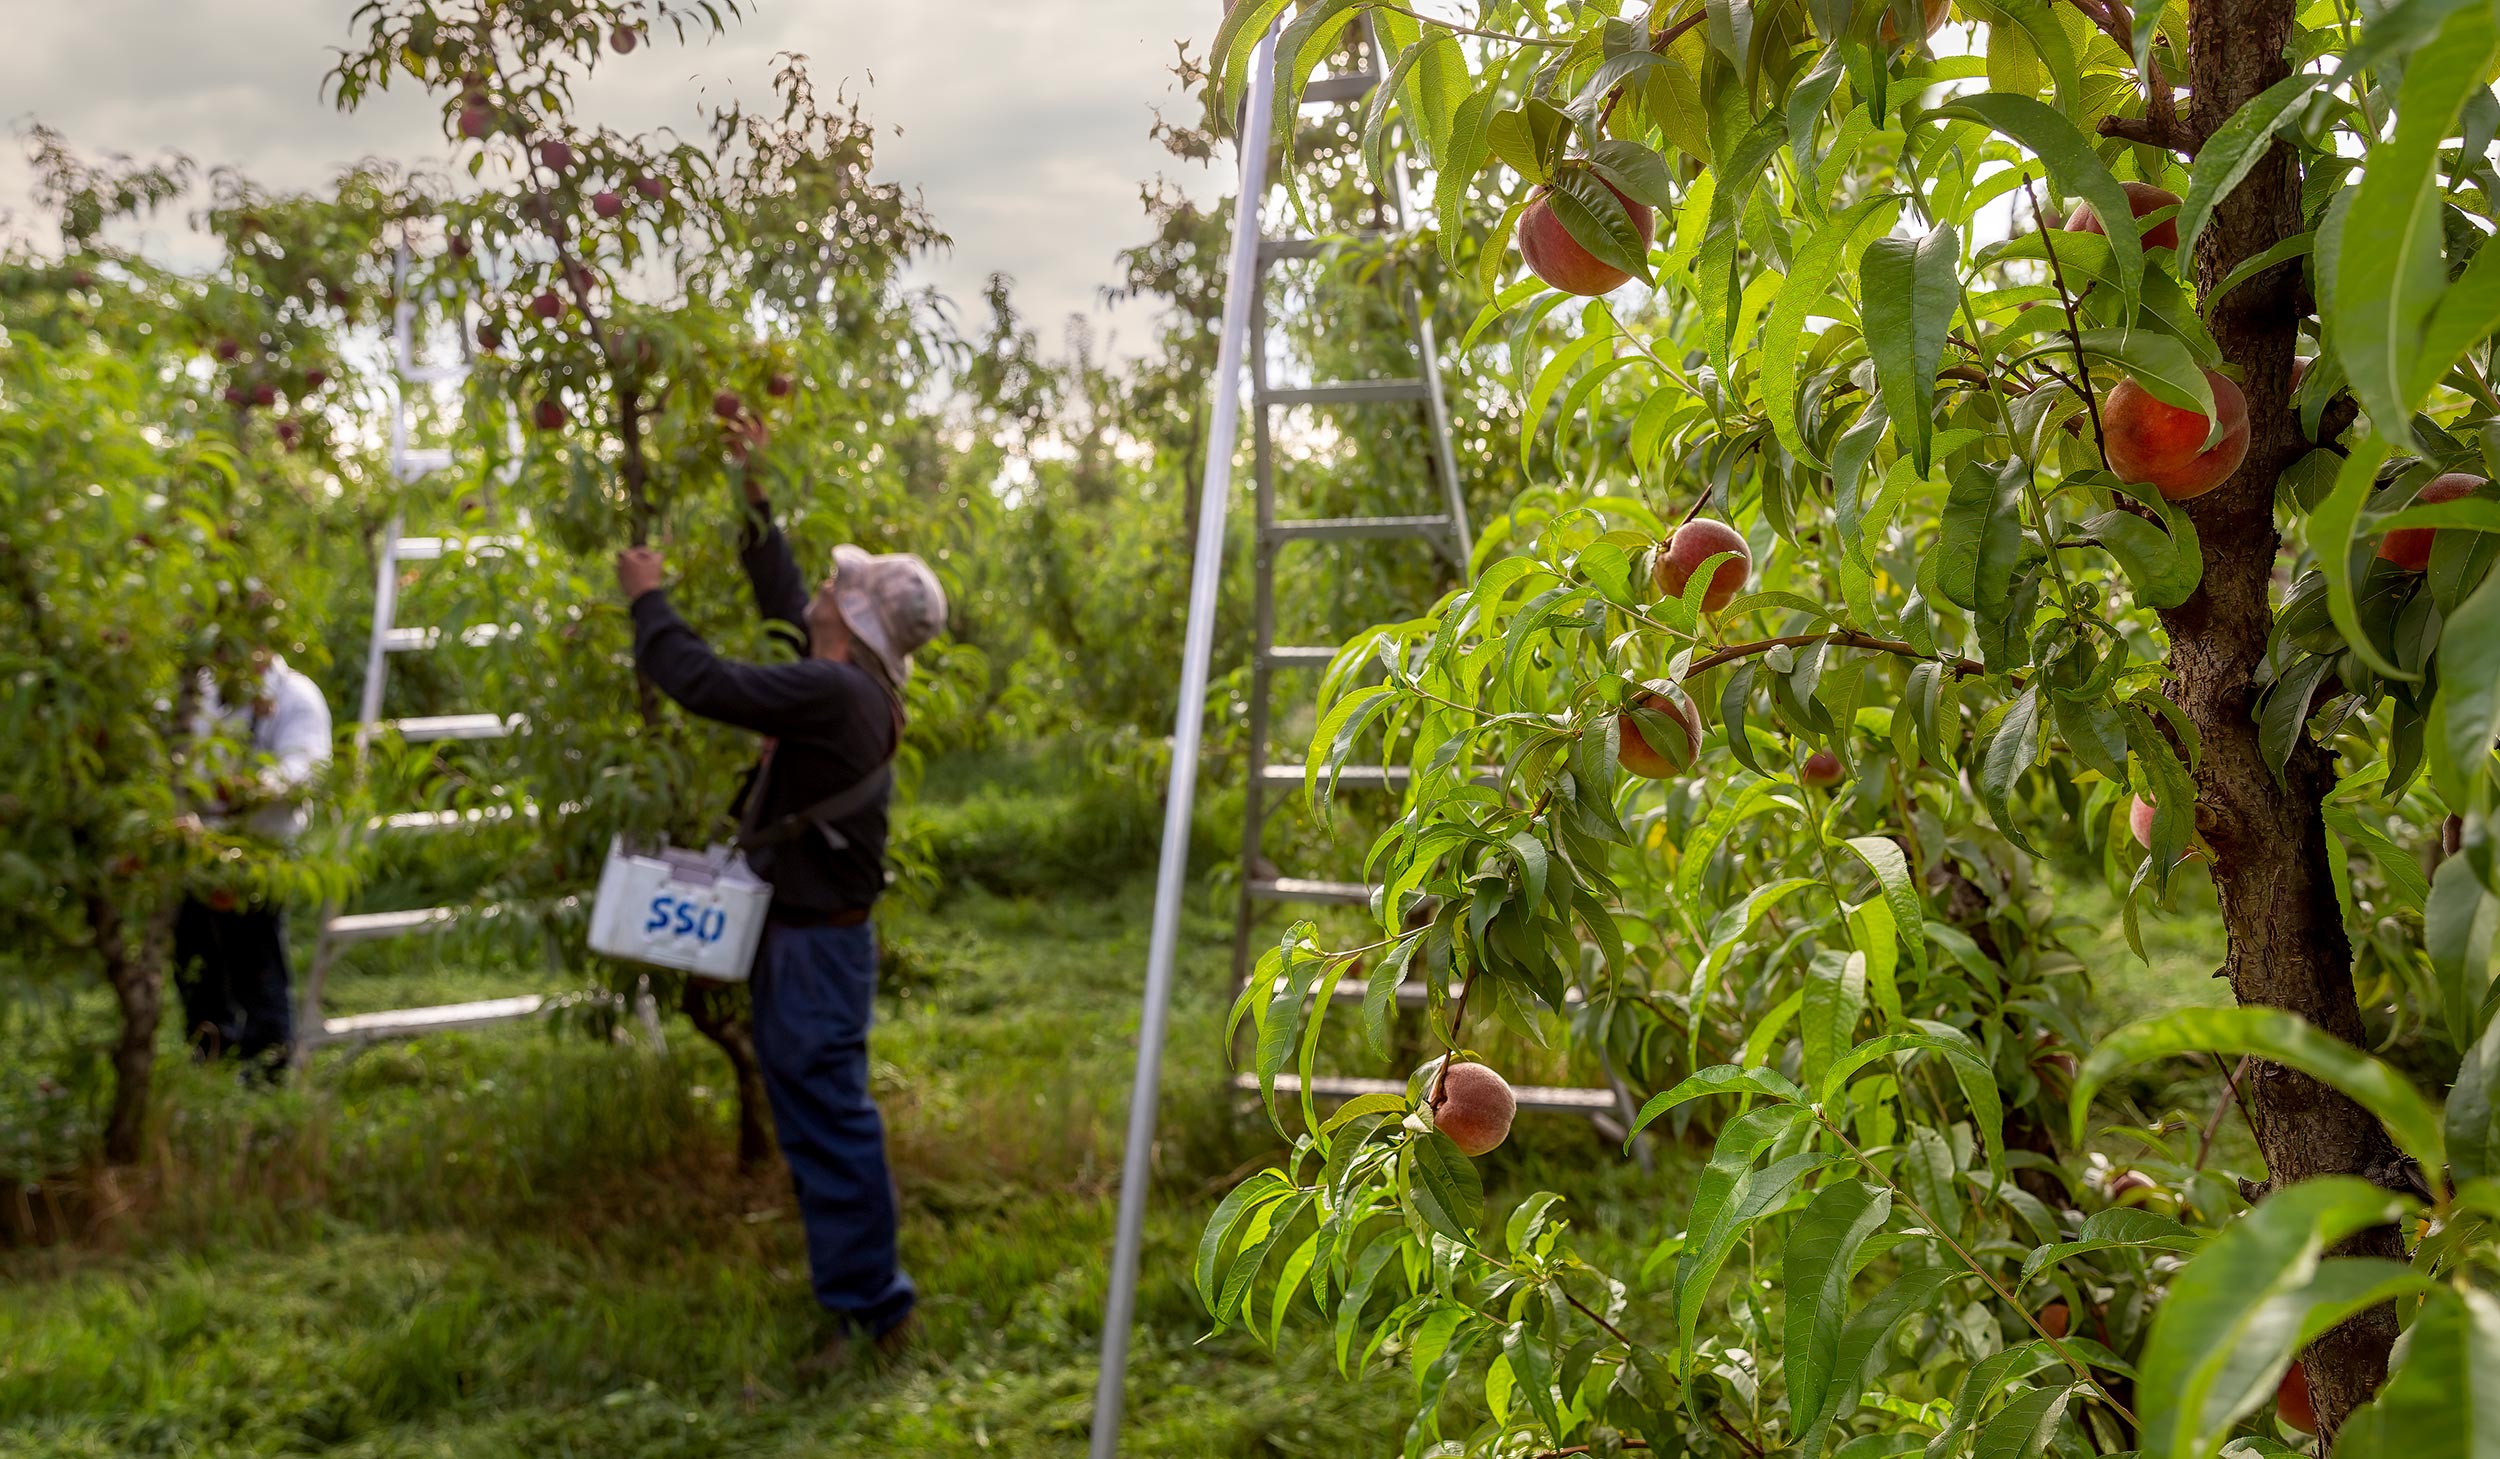 Crop workers picking peaches from the ground surrounded by ladders in an orchard. Agriculture Photography